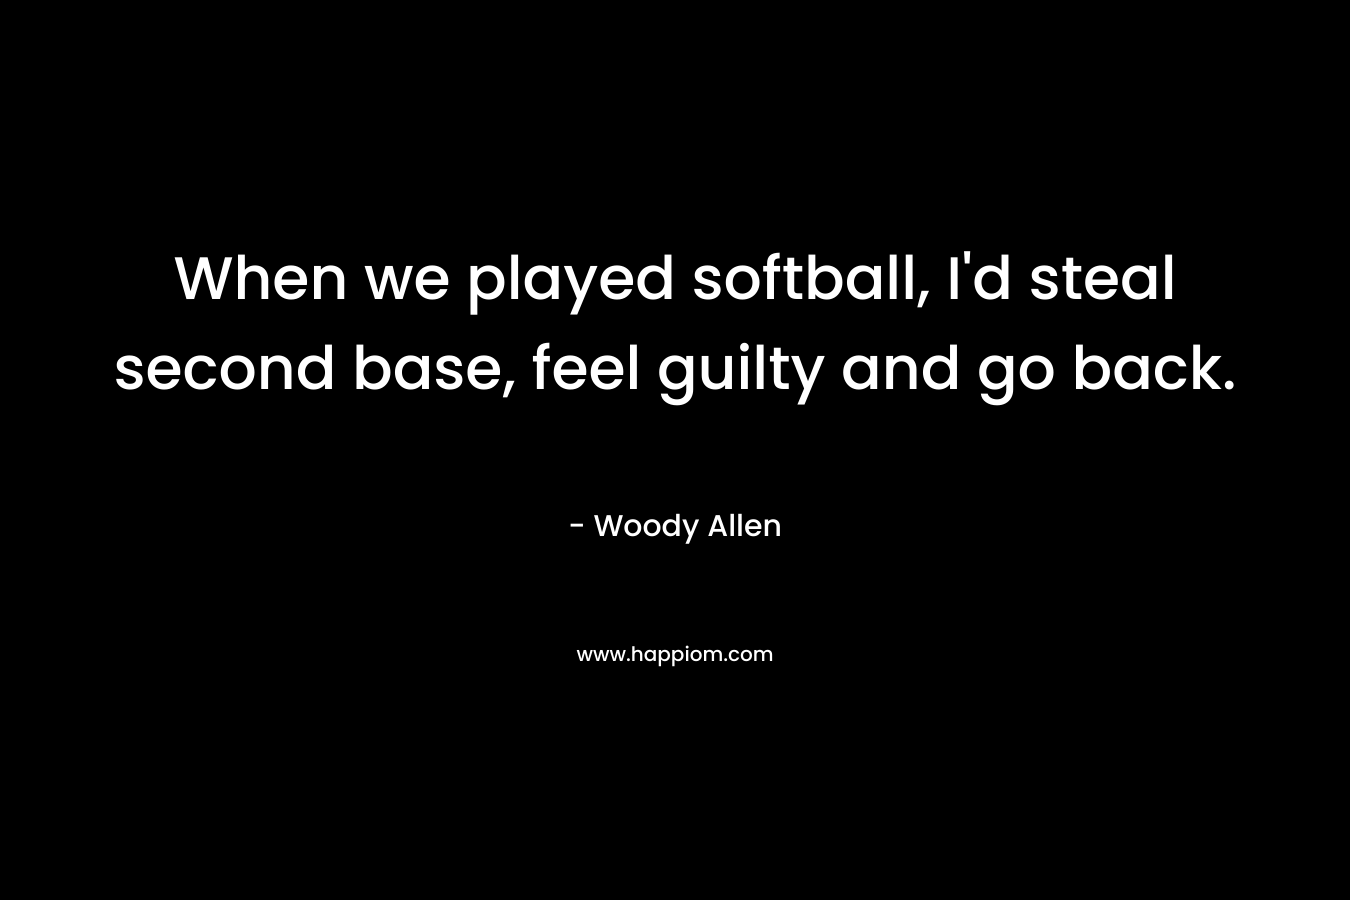 When we played softball, I’d steal second base, feel guilty and go back. – Woody Allen